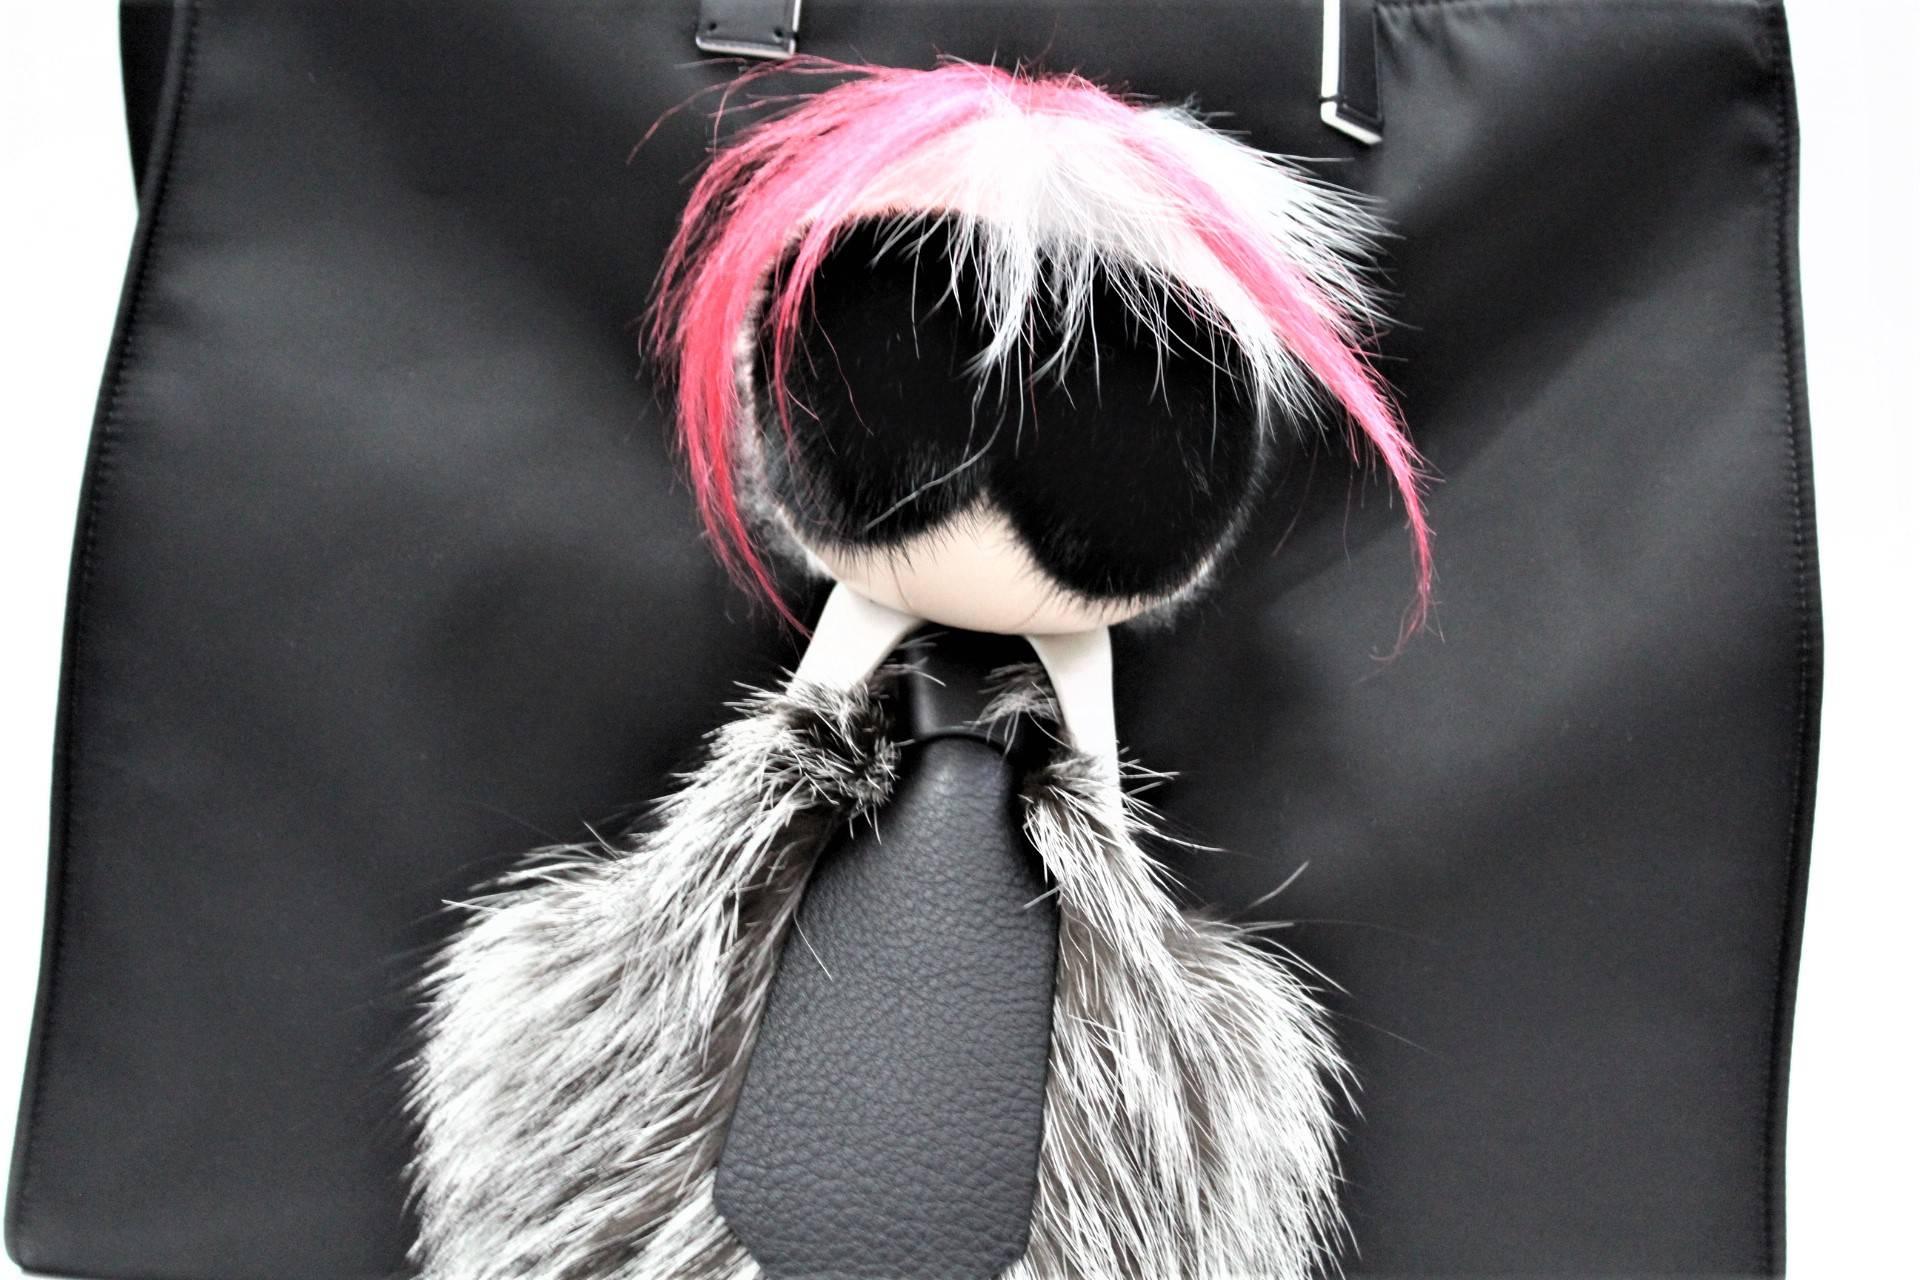 Only 600 items of this incredible bag are in the world. It’s a black textile tote with a giant Karlito mounted on the front, plus a pink fur mohawk down the back.